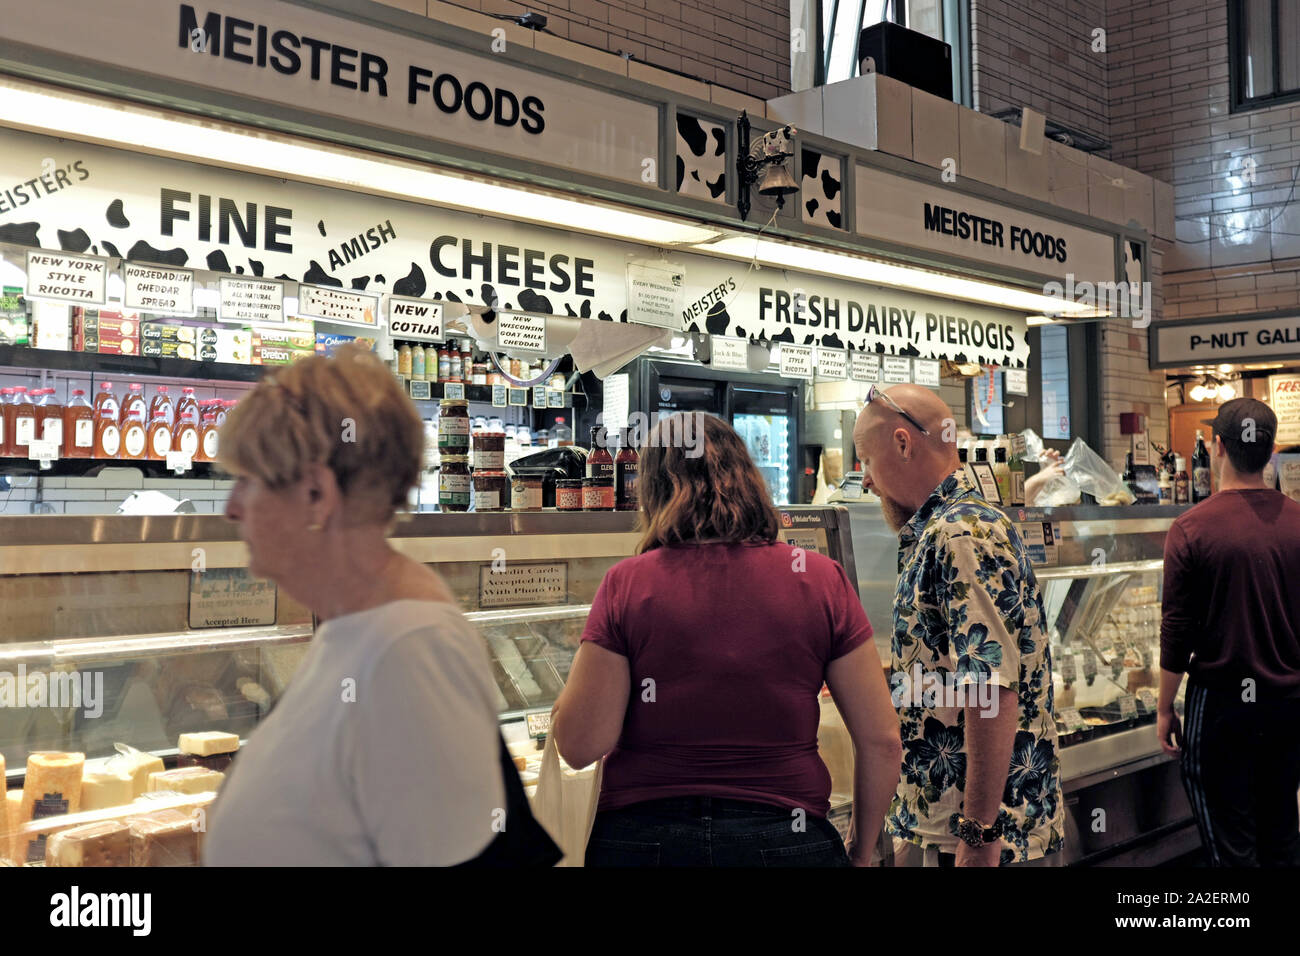 Meister Foods is one of over 100 food stands at the historic Cleveland West Side Market in the Ohio City neighborhood of Cleveland, Ohio, USA. Stock Photo